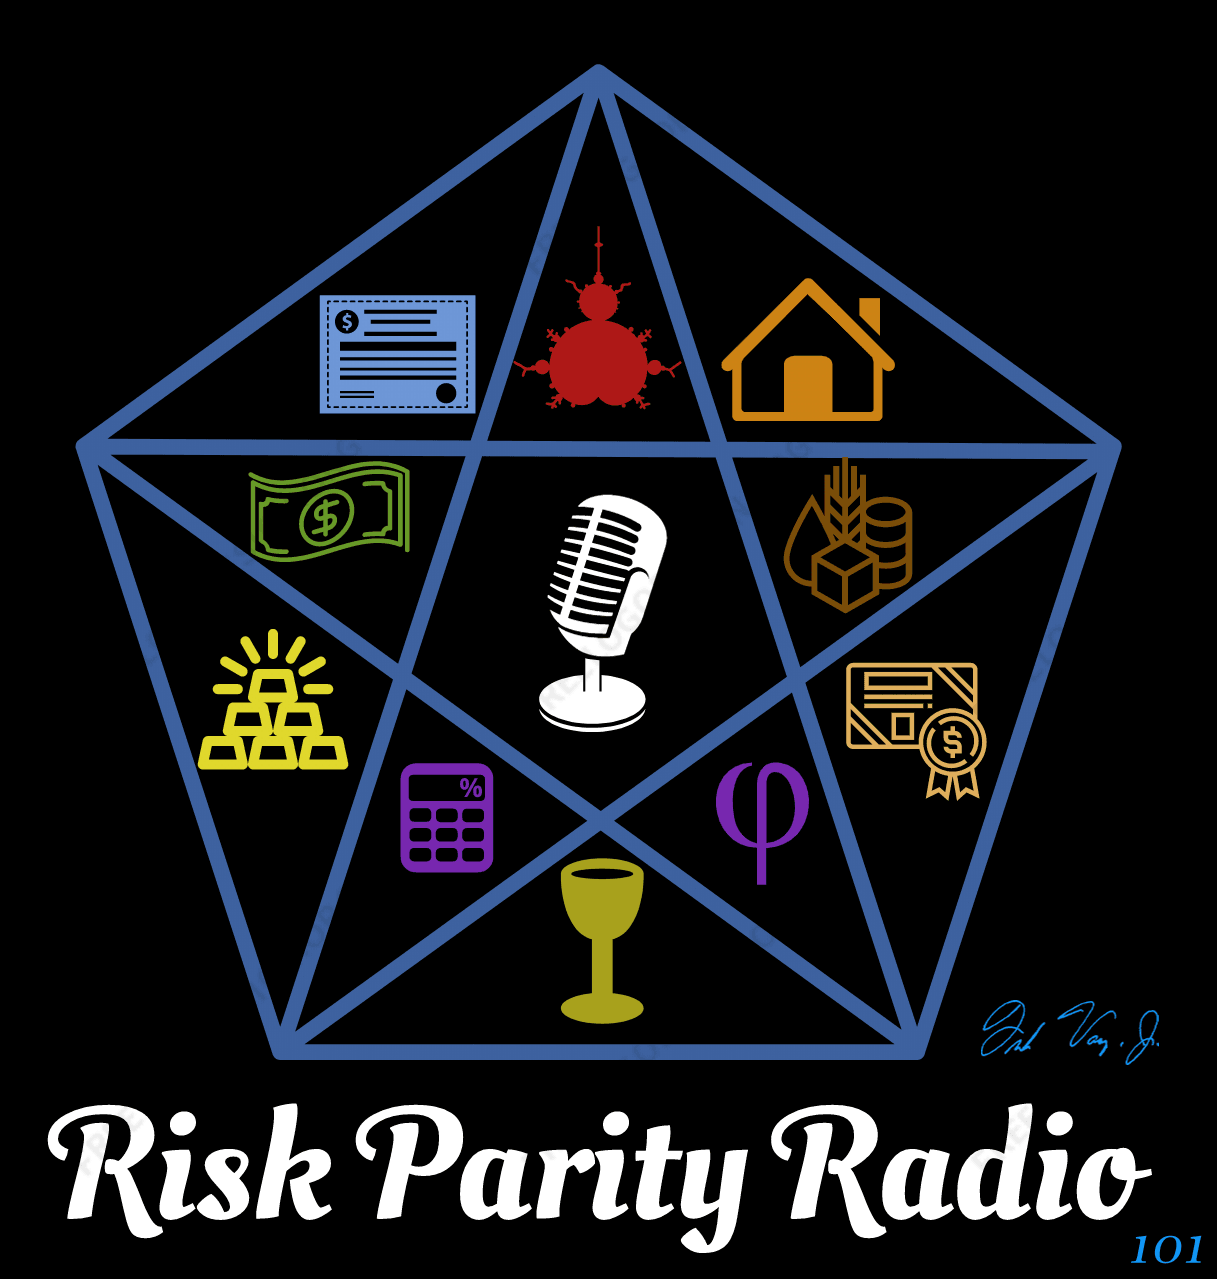 Limited Edition Risk Parity Radio Autographed Print #101